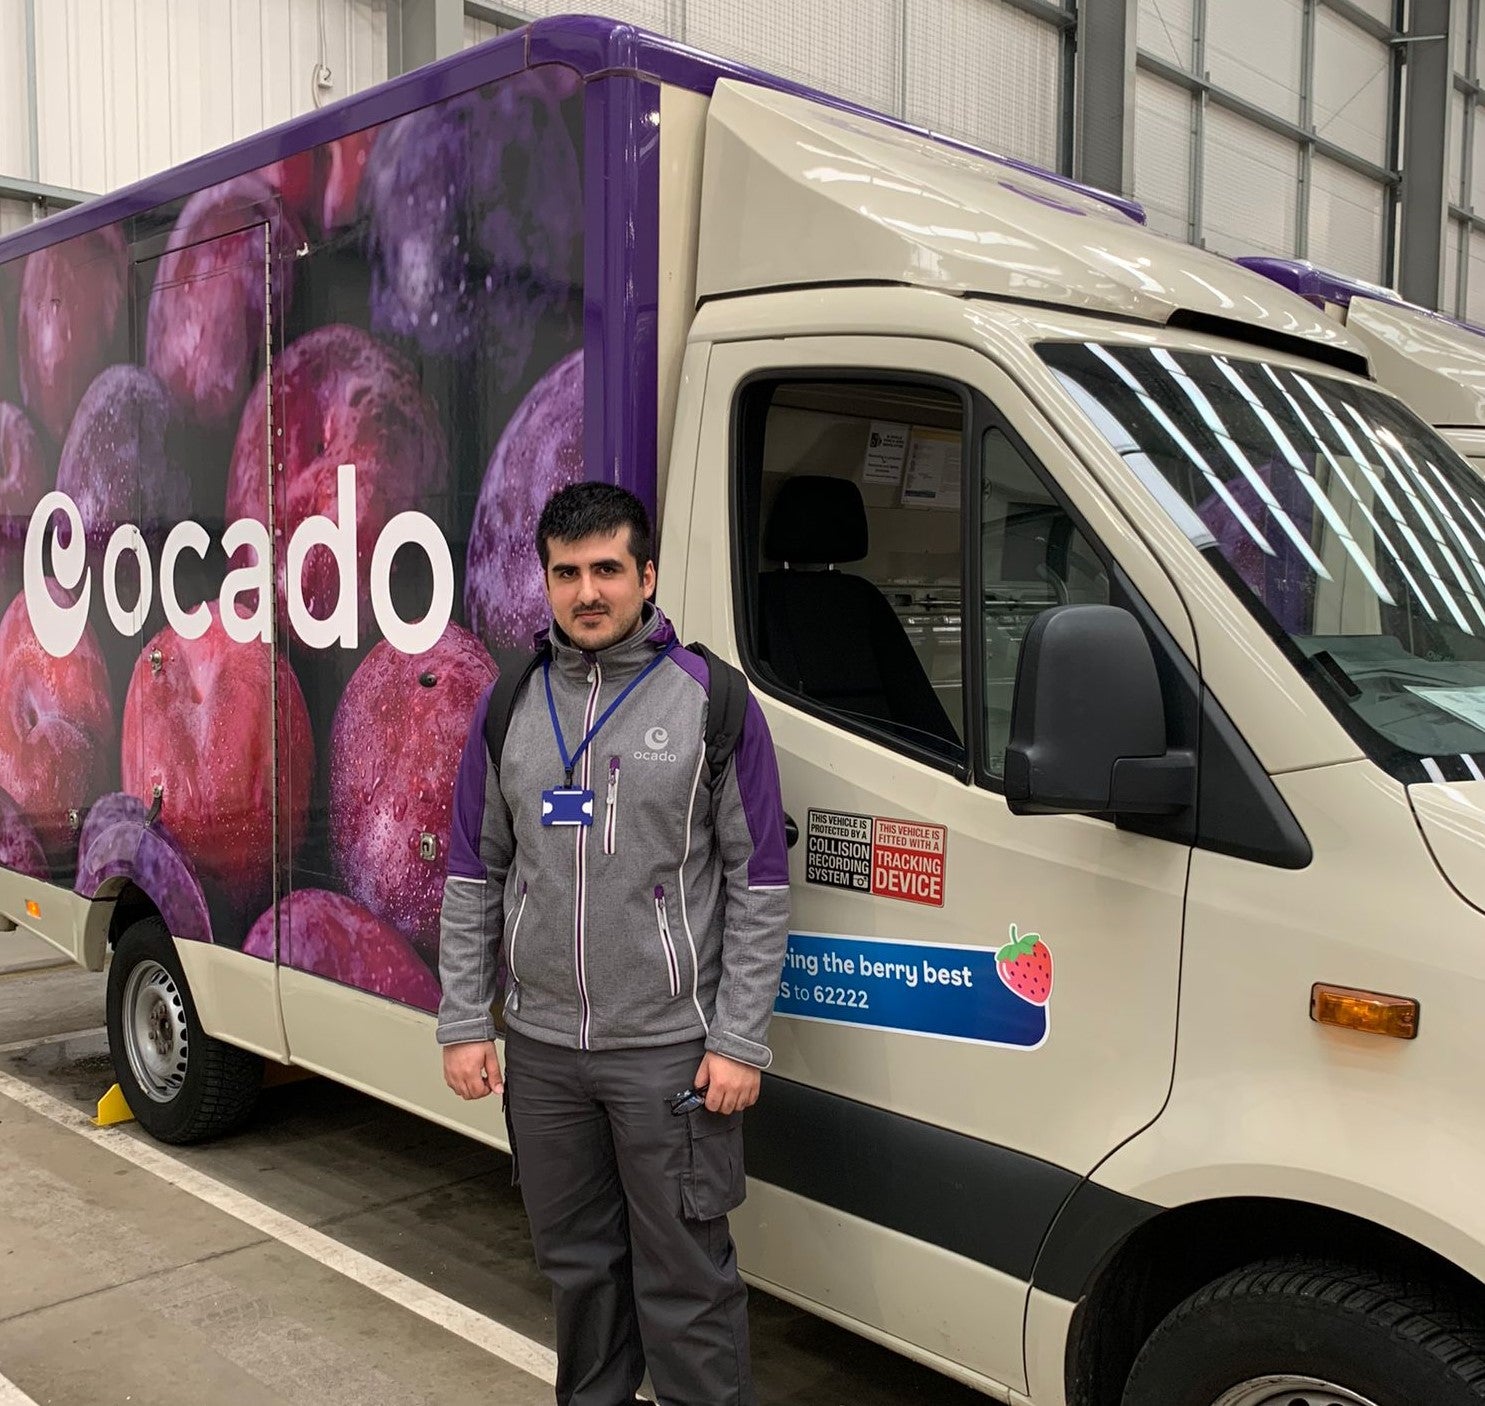 Niav is standing next to an Ocardo van as part of a work placement